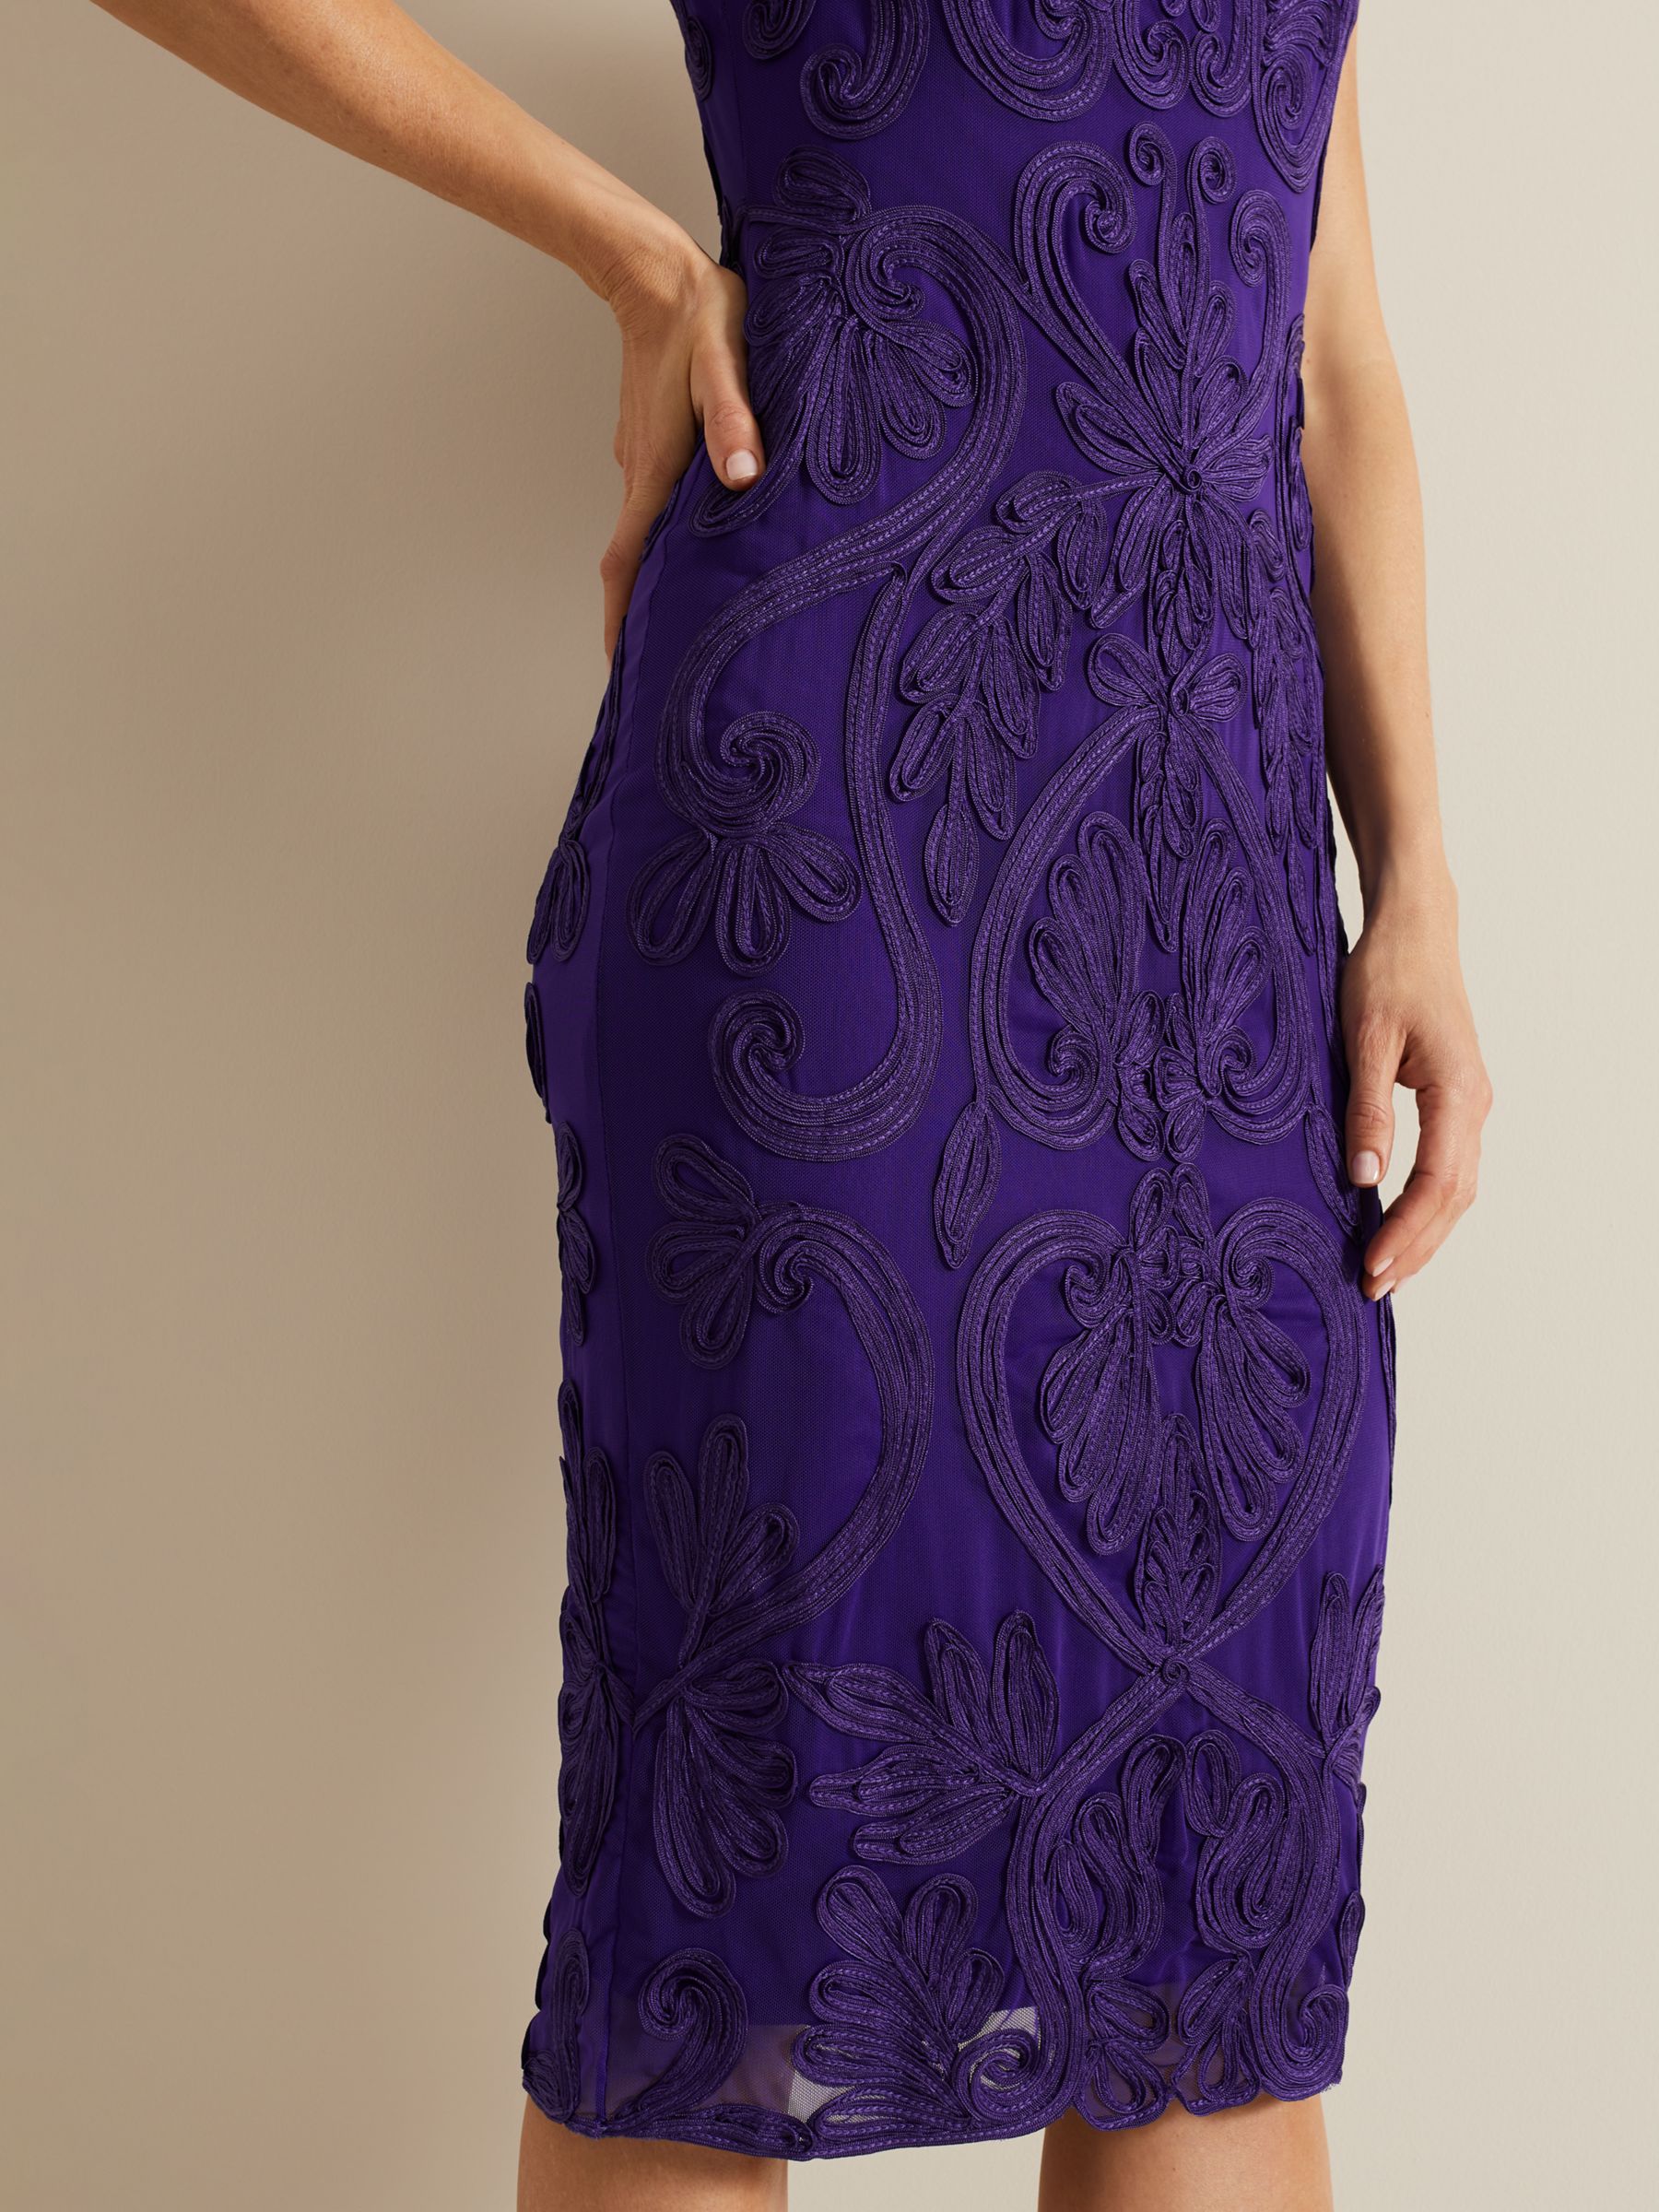 Phase Eight Andrea Tapework Dress, Violet, 6